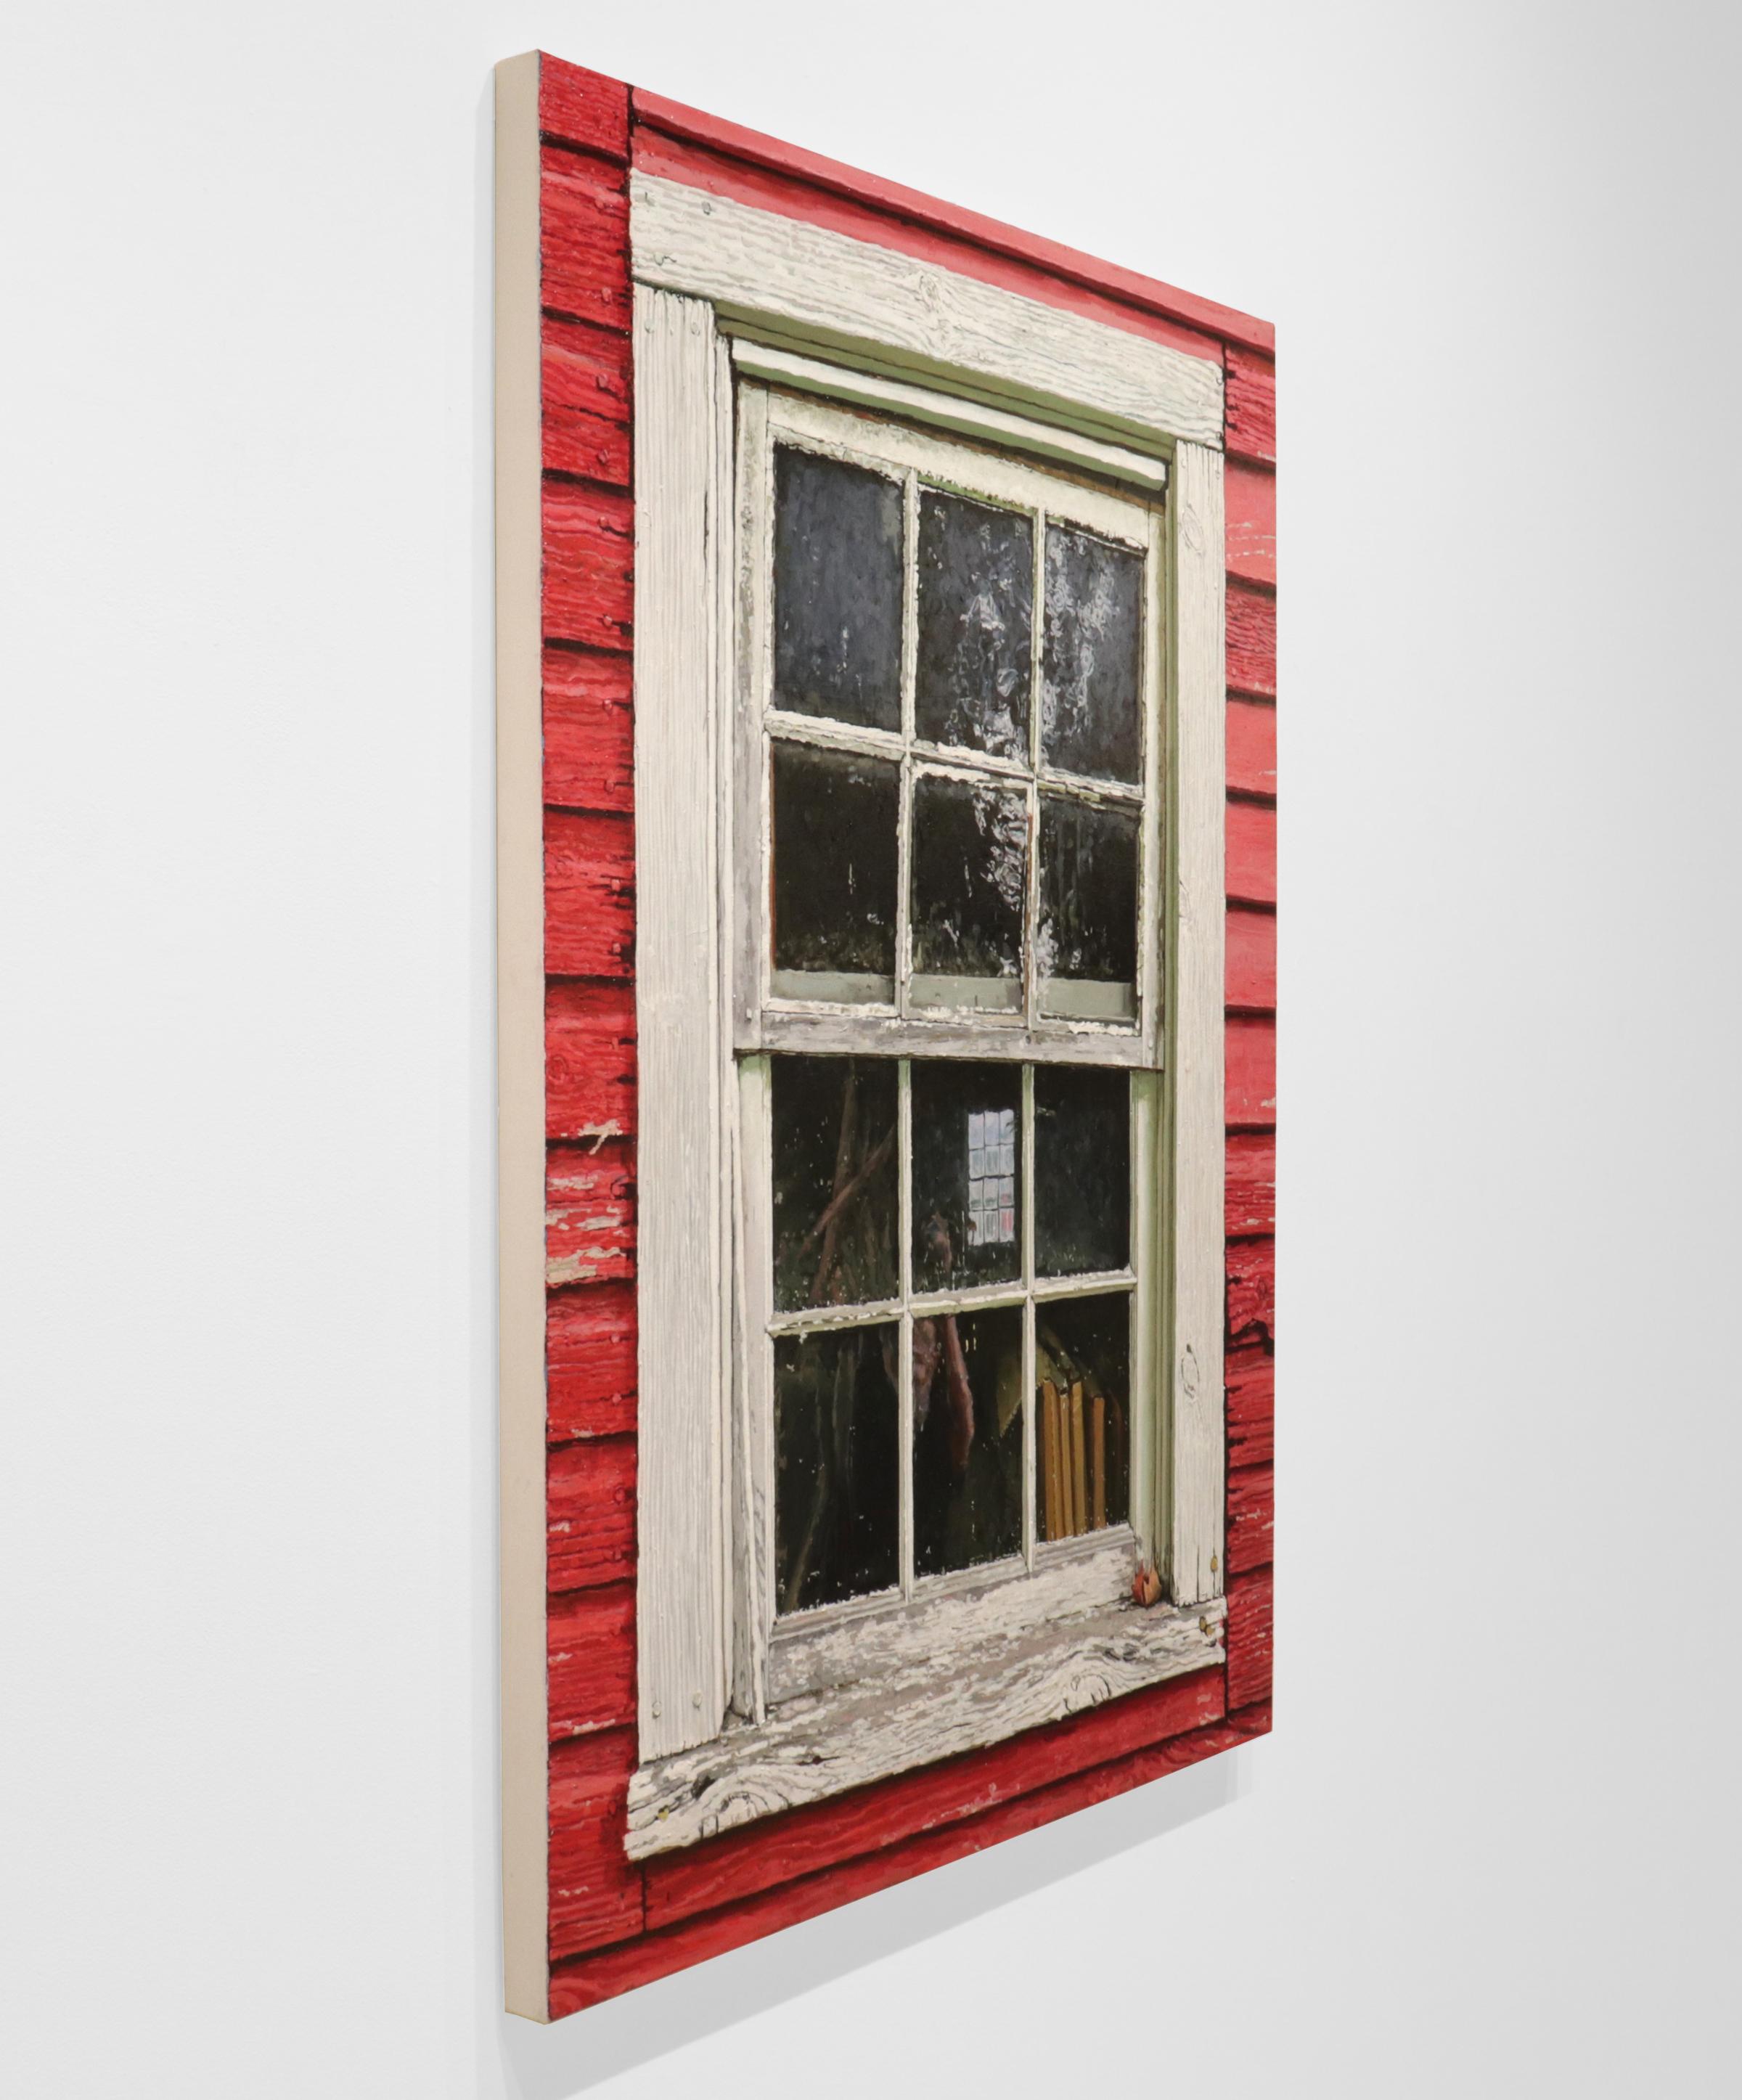 BARN WINDOW - Photorealism / Old Red Barn / Weathered Farmhouse / Reflection - Contemporary Painting by Richard Combes